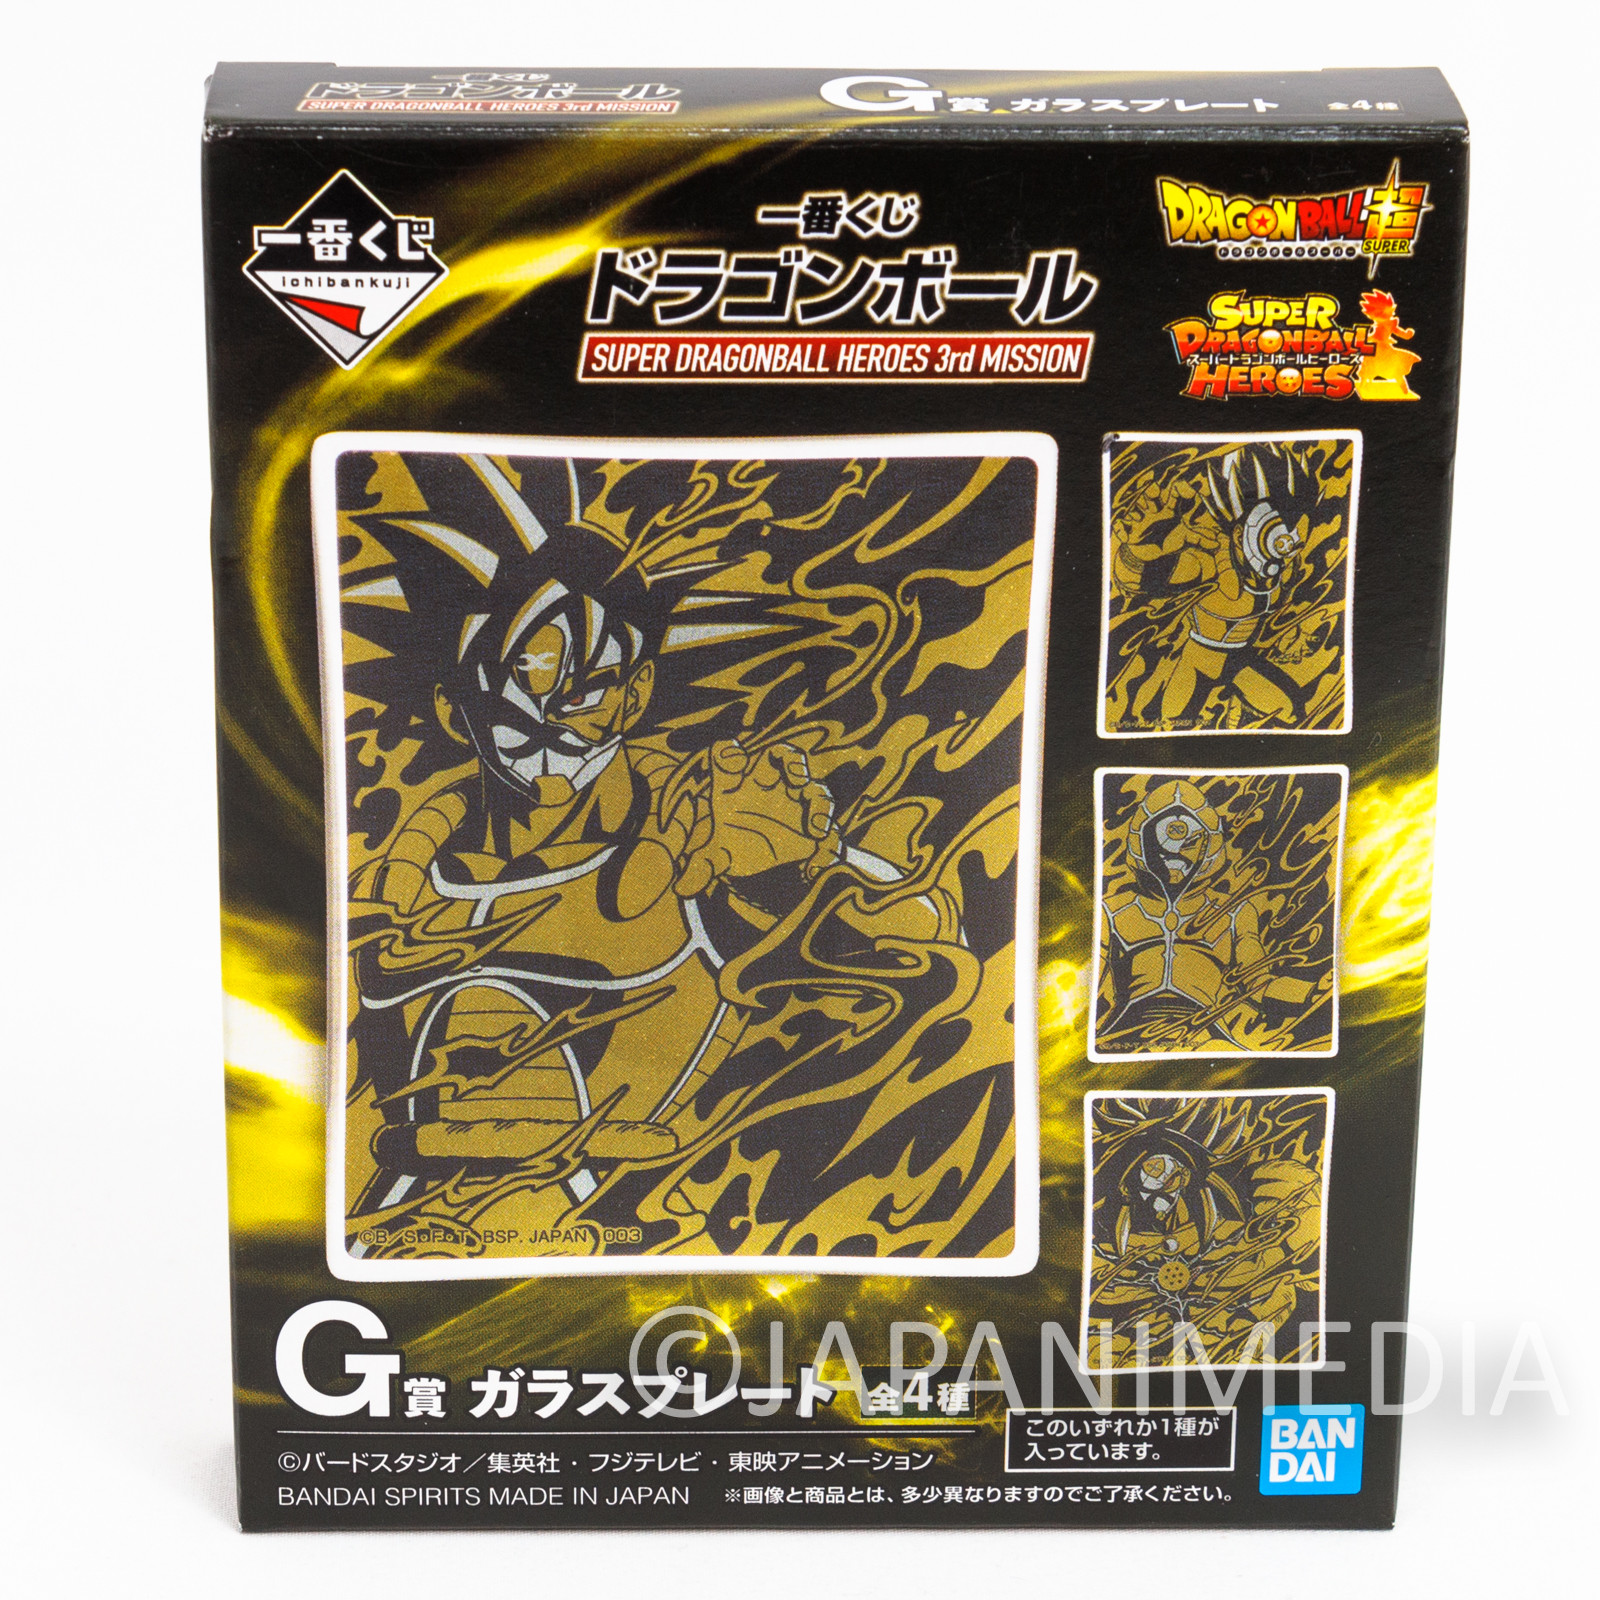 Super Dragon Ball Heroes Picture Glass Plate #2 BANDAI